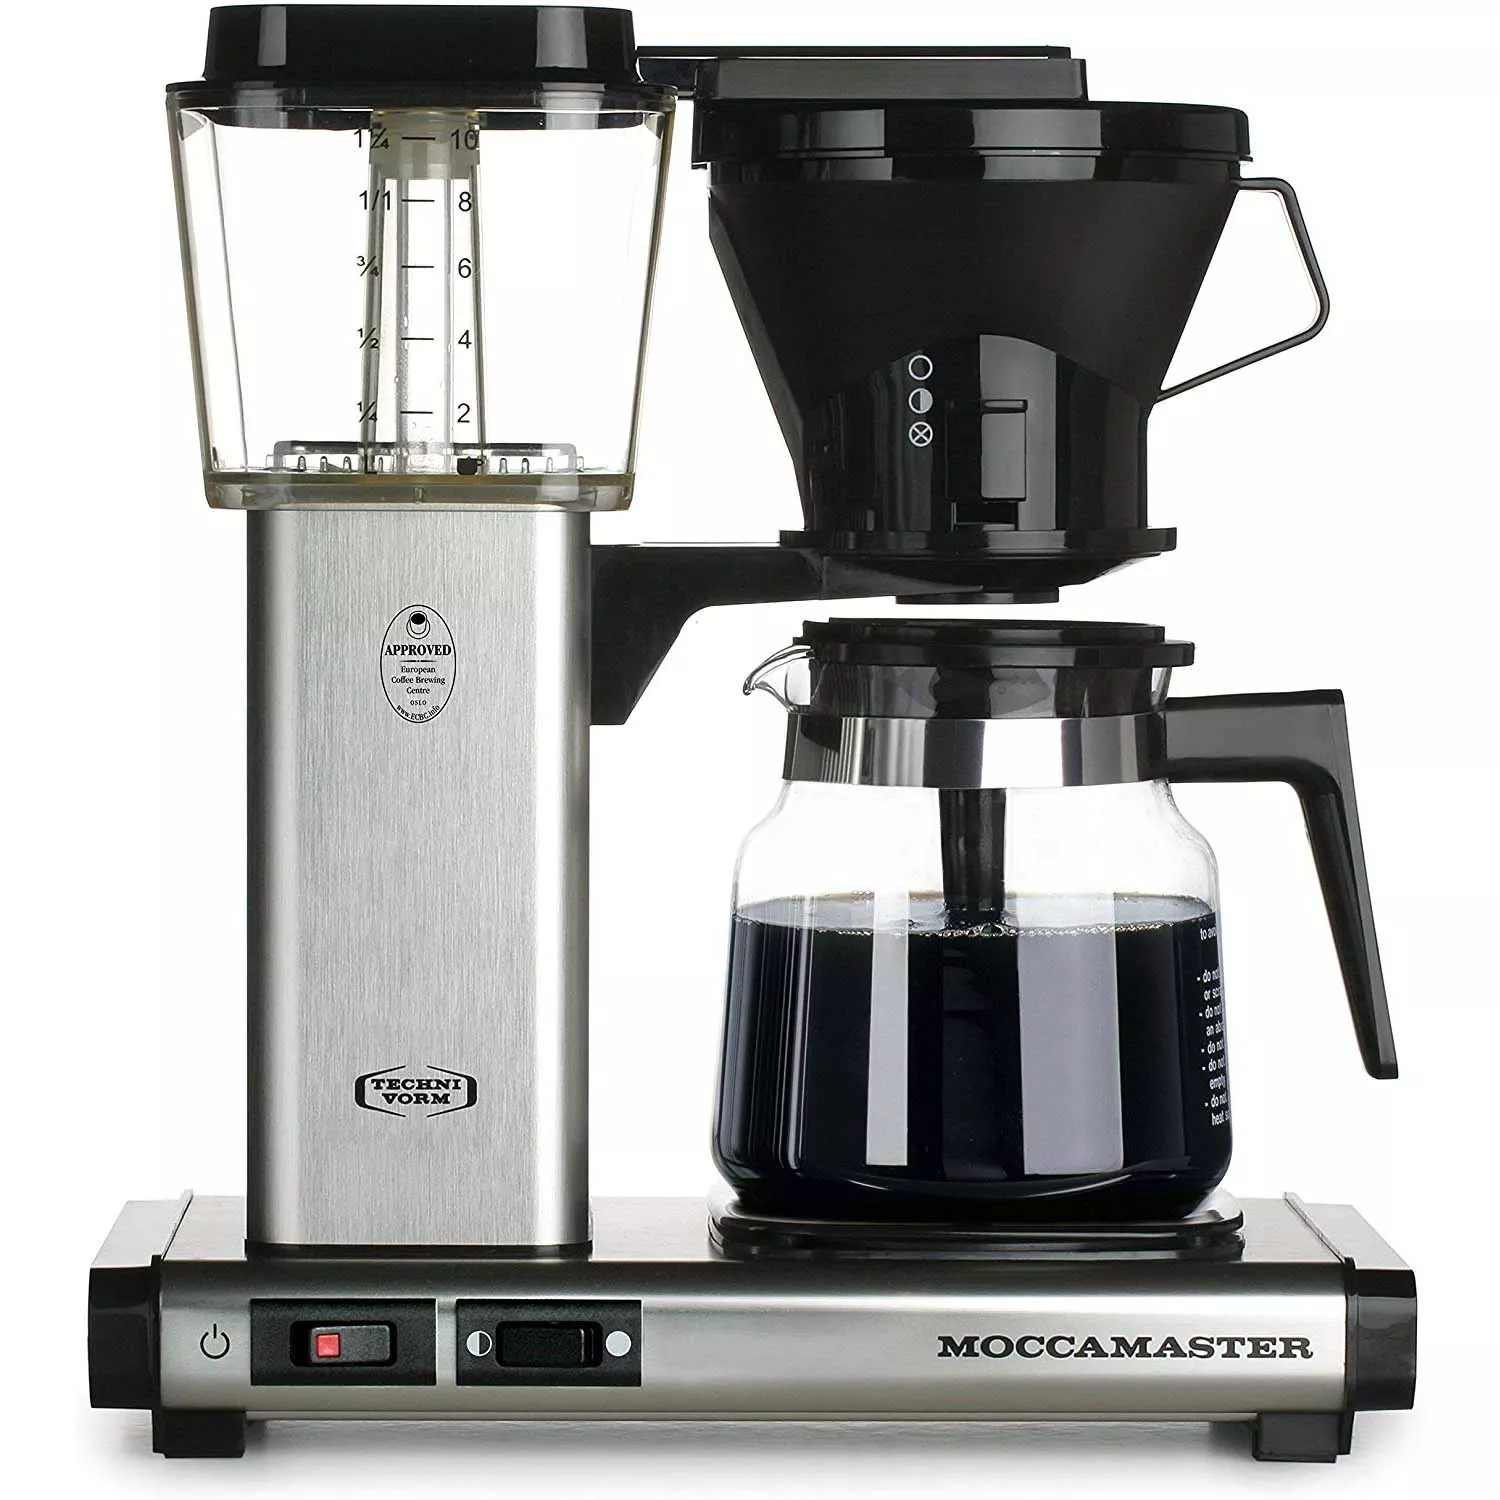 The Mr Coffee Iced Coffee Maker Is 50% Off at